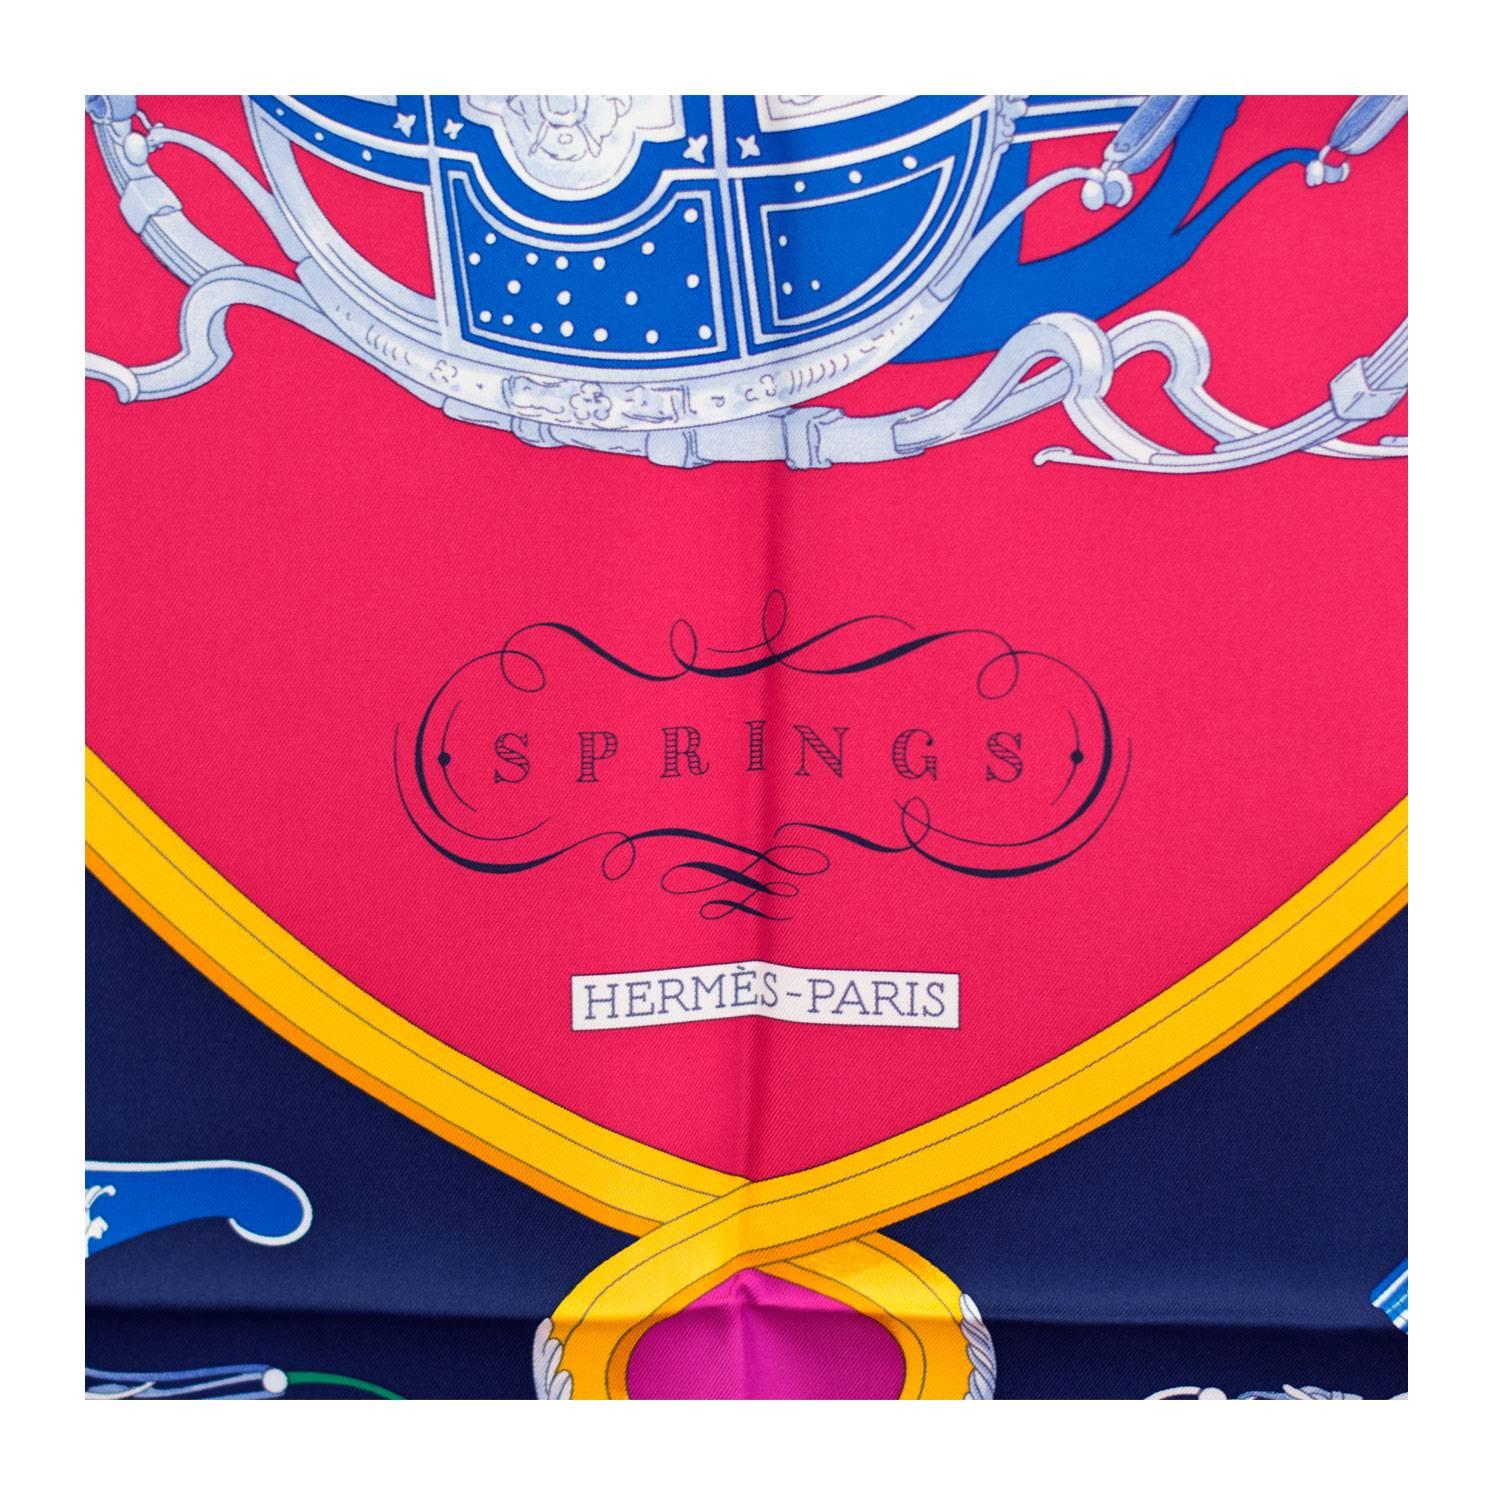 Hermes Carre Twill 100% Soie 90x90 cm SpringS Fuchsia/Marine 2016

Pre-owned and never used.

Bought it in Hermes store in 2016.

Model: SpringS

Composition: 100% Silk.

Size: 90cm x 90cm.

Color: Fuchsia/Marine

This scarf have never